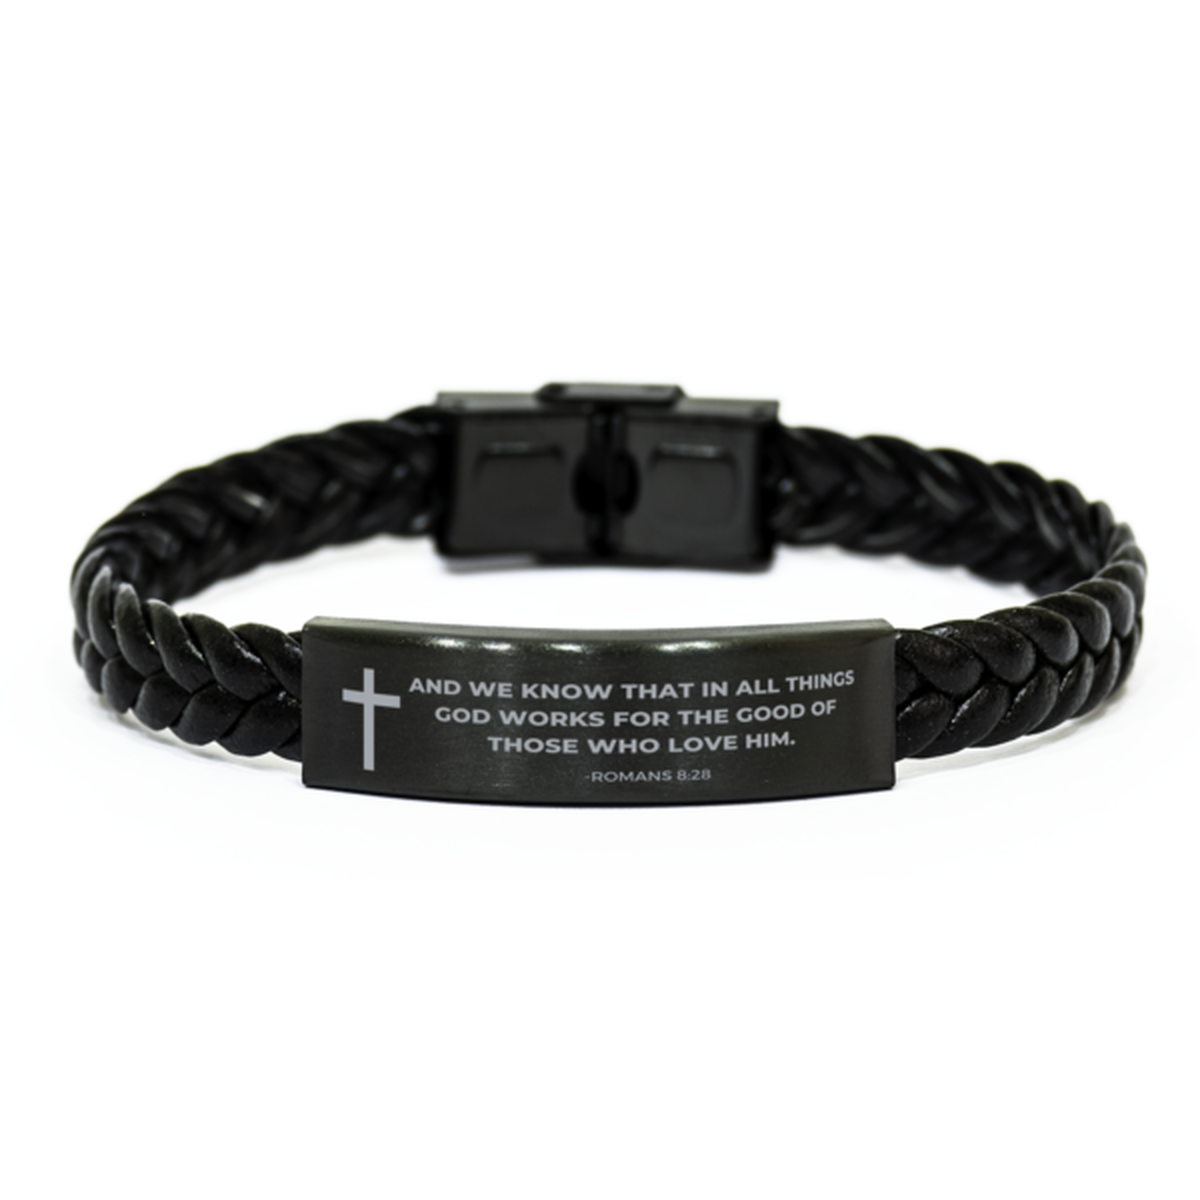 Baptism Gifts For Teenage Boys Girls, Christian Bible Verse Braided Leather Bracelet, And we know that in all things, Catholic Confirmation Gifts for Son, Godson, Grandson, Nephew